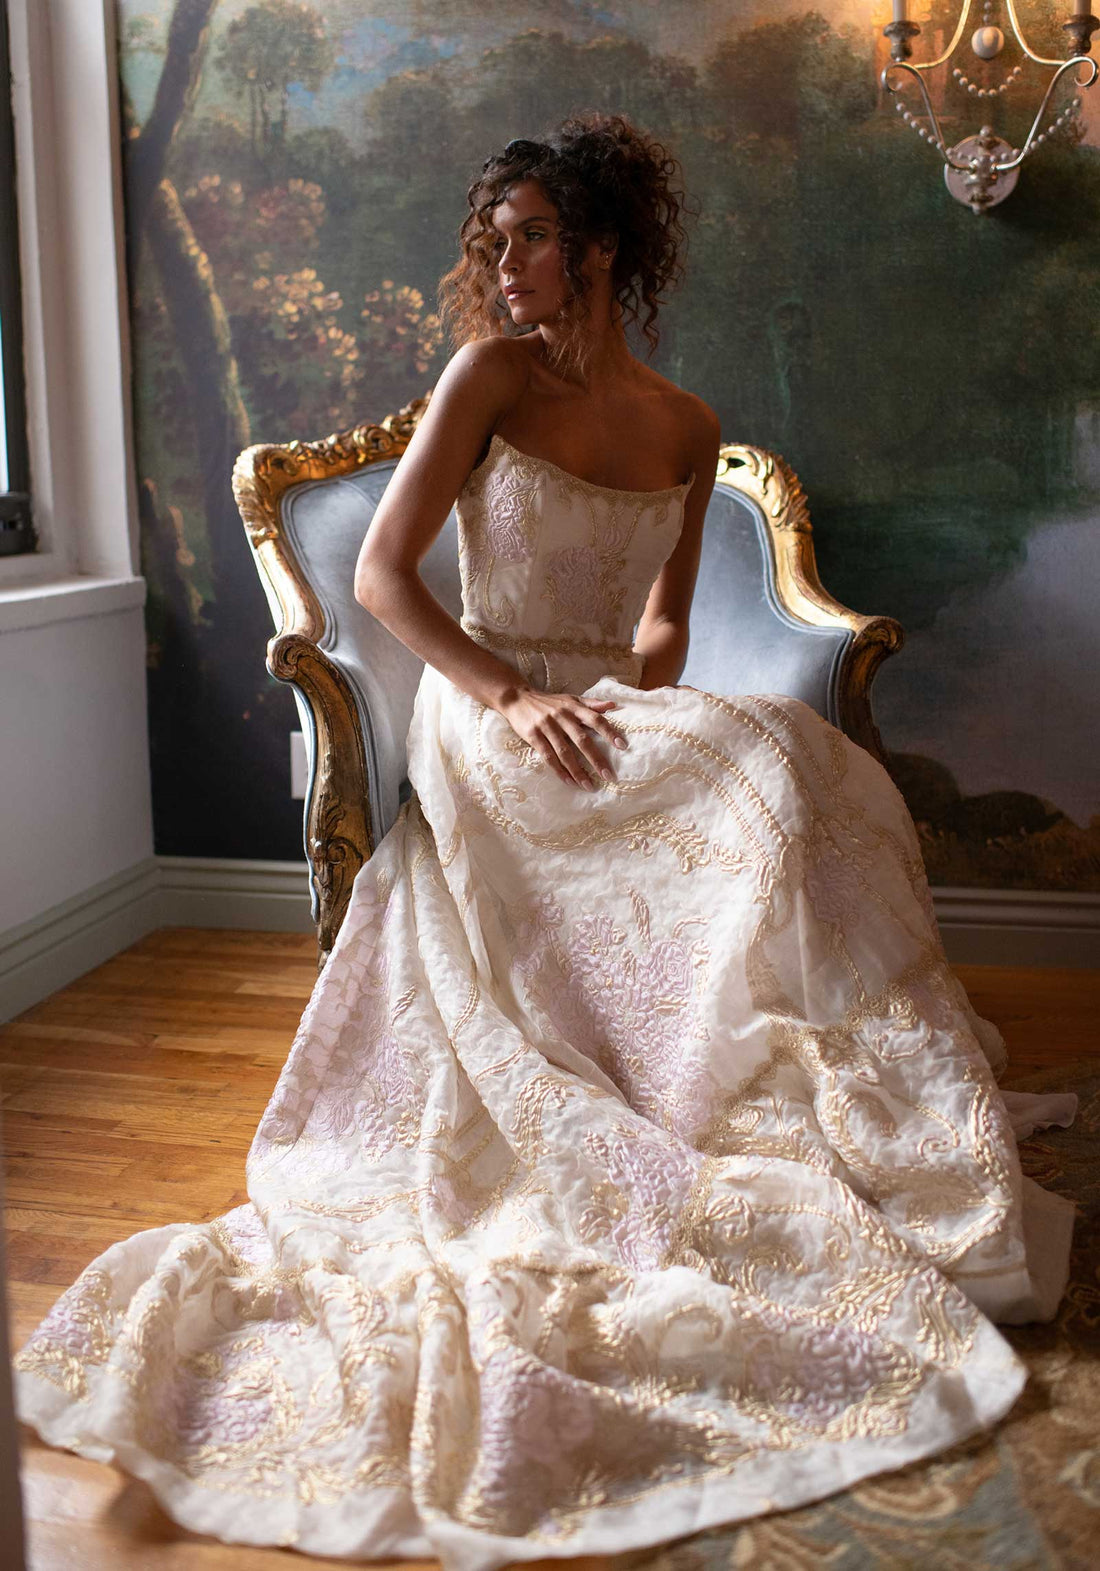 Bride seated in romantic setting in Couture wedding dress with gold embellishments and lace trims